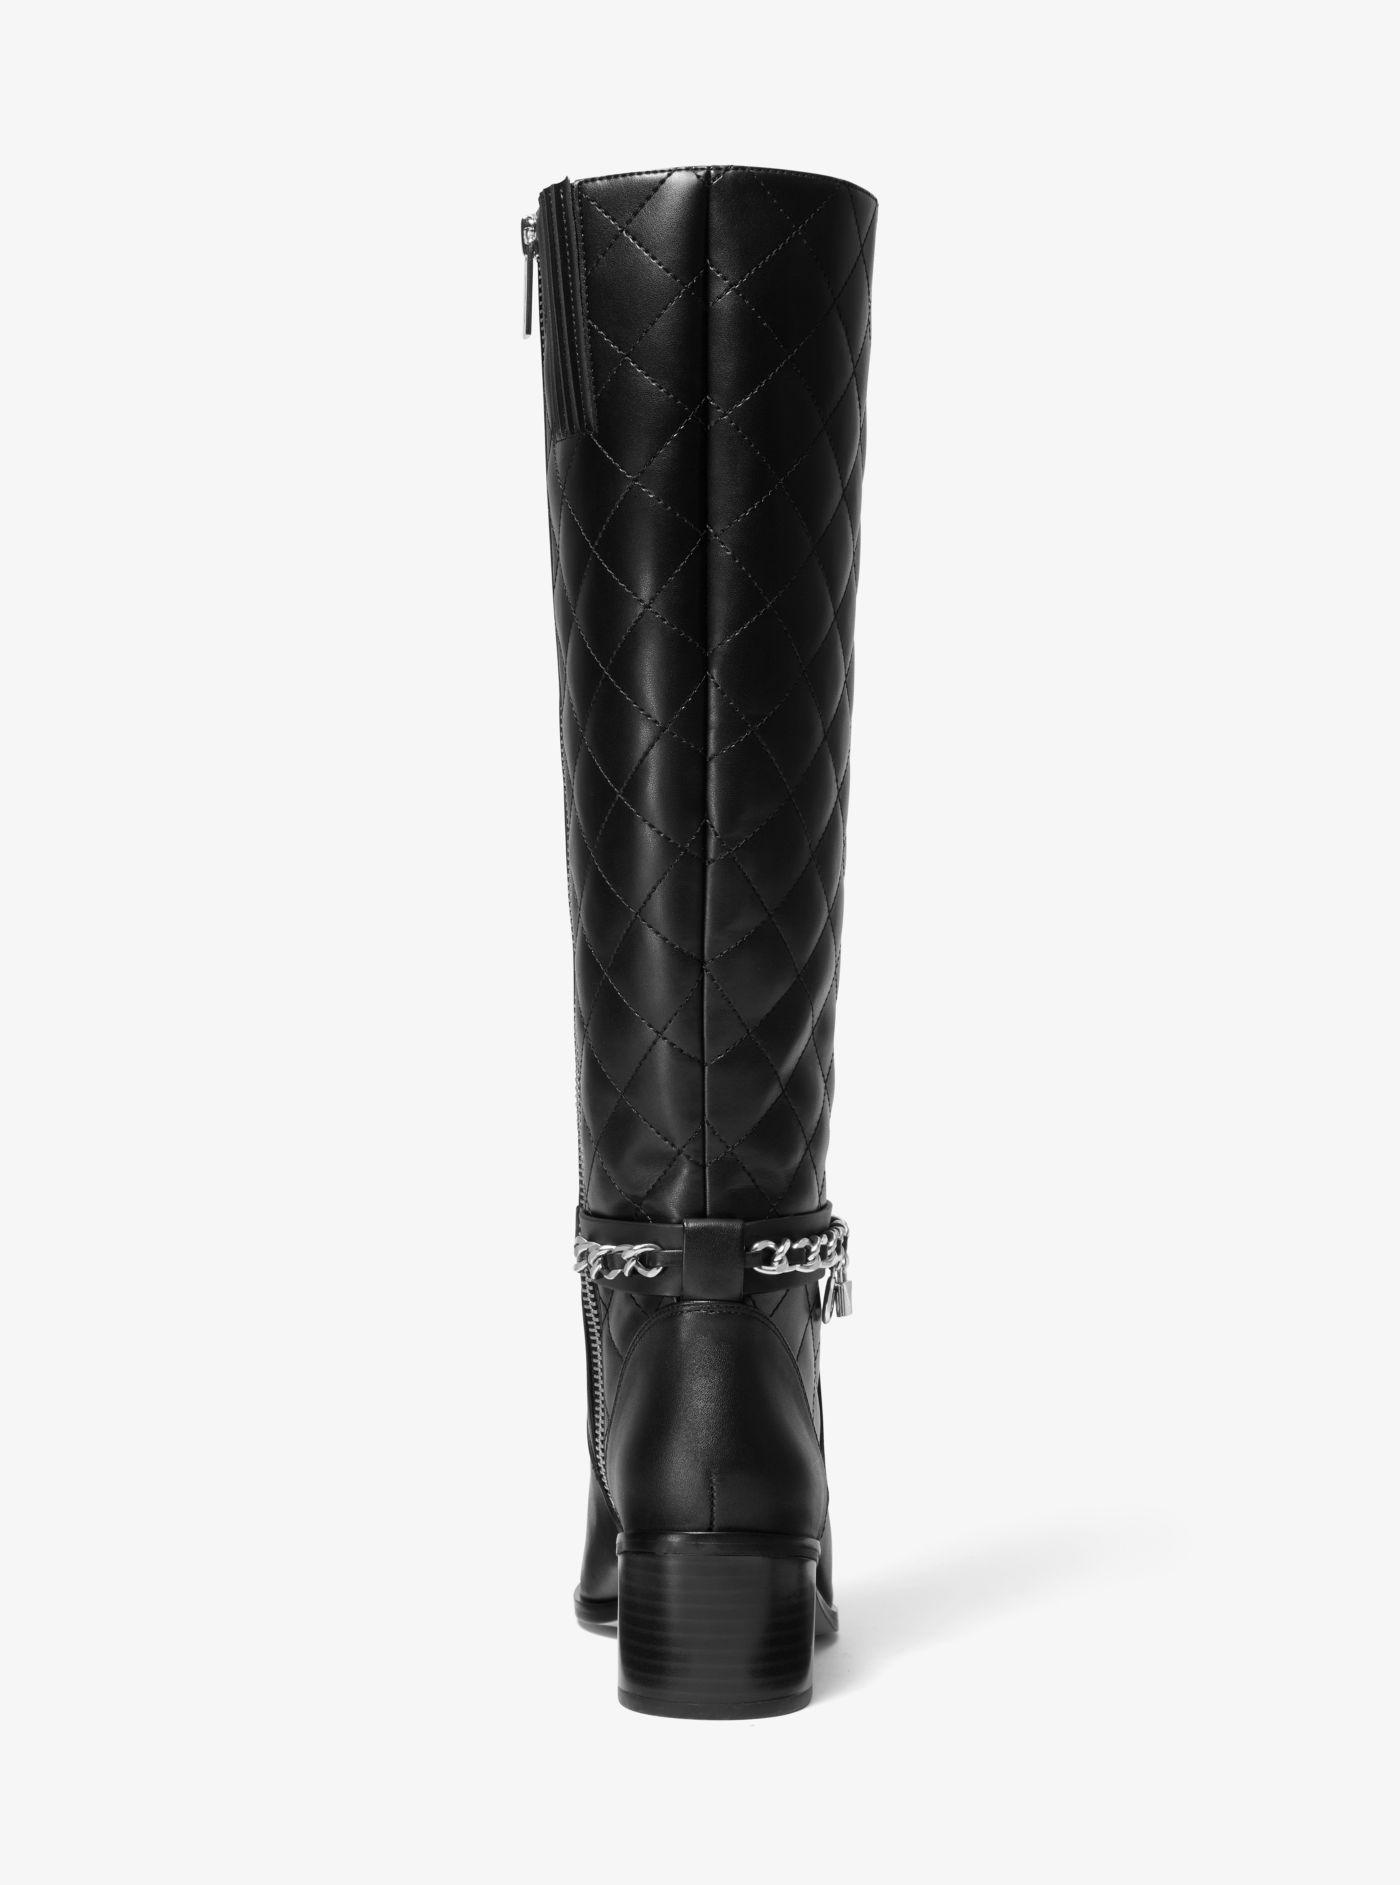 Michael Kors Elsa Quilted Leather Boot in Black | Lyst